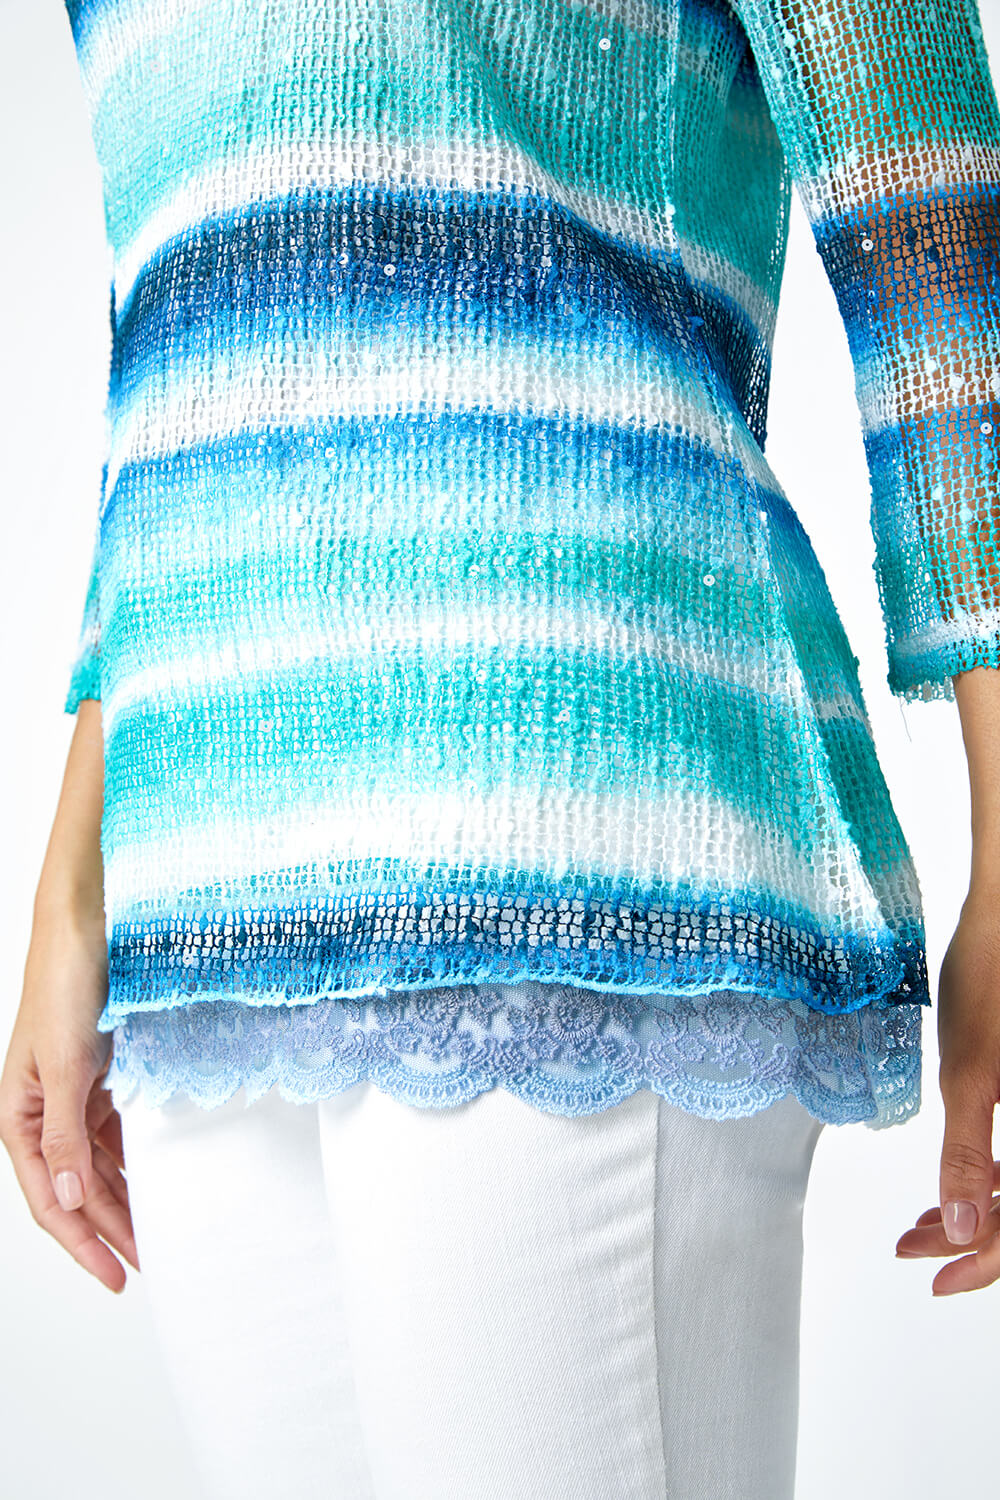 Blue Lace Trim Stripe Mesh Overlay Top, Image 5 of 5